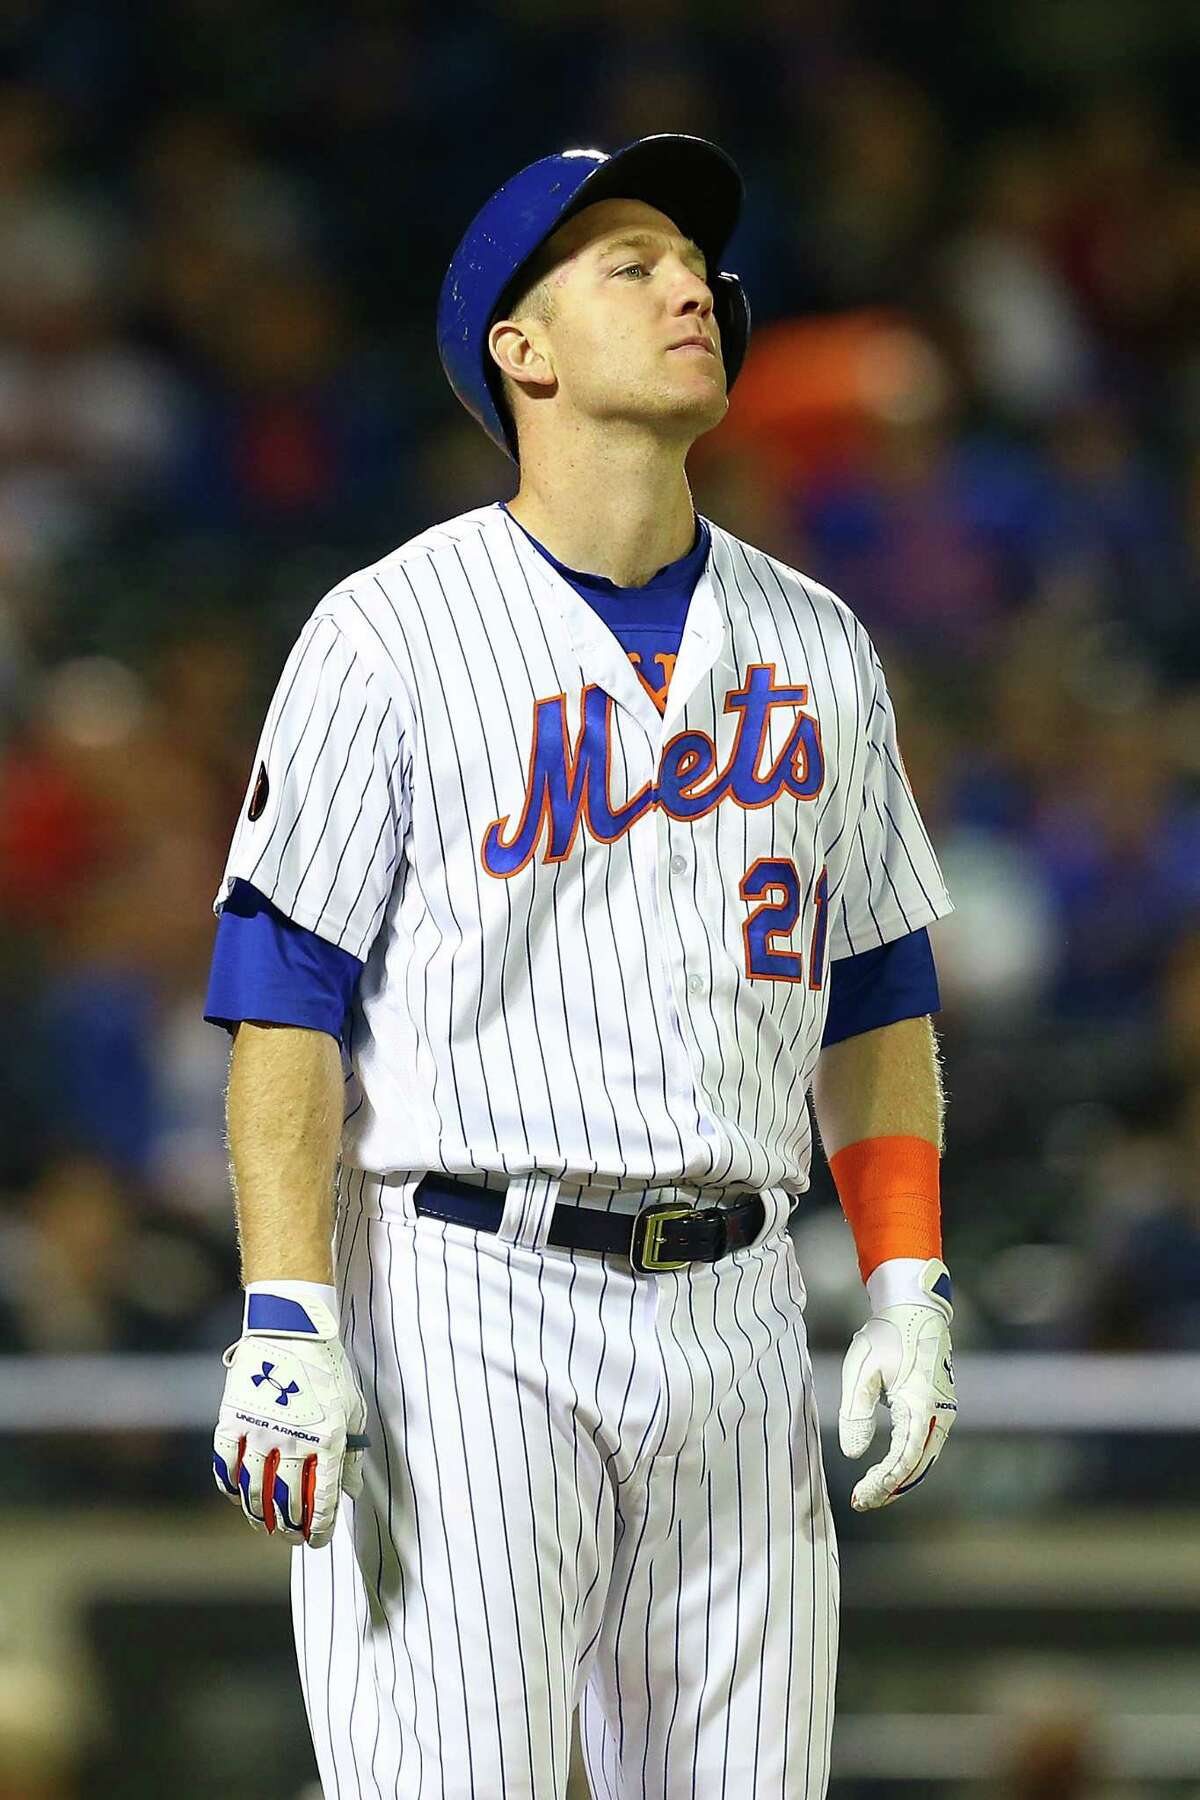 NEW YORK, NY - MAY 05: Todd Frazier #21 of the New York Mets reacts after hitting into a double play to end the sixth inning against the Colorado Rockies at Citi Field on May 5, 2018 in the Flushing neighborhood of the Queens borough of New York City. (Photo by Mike Stobe/Getty Images)